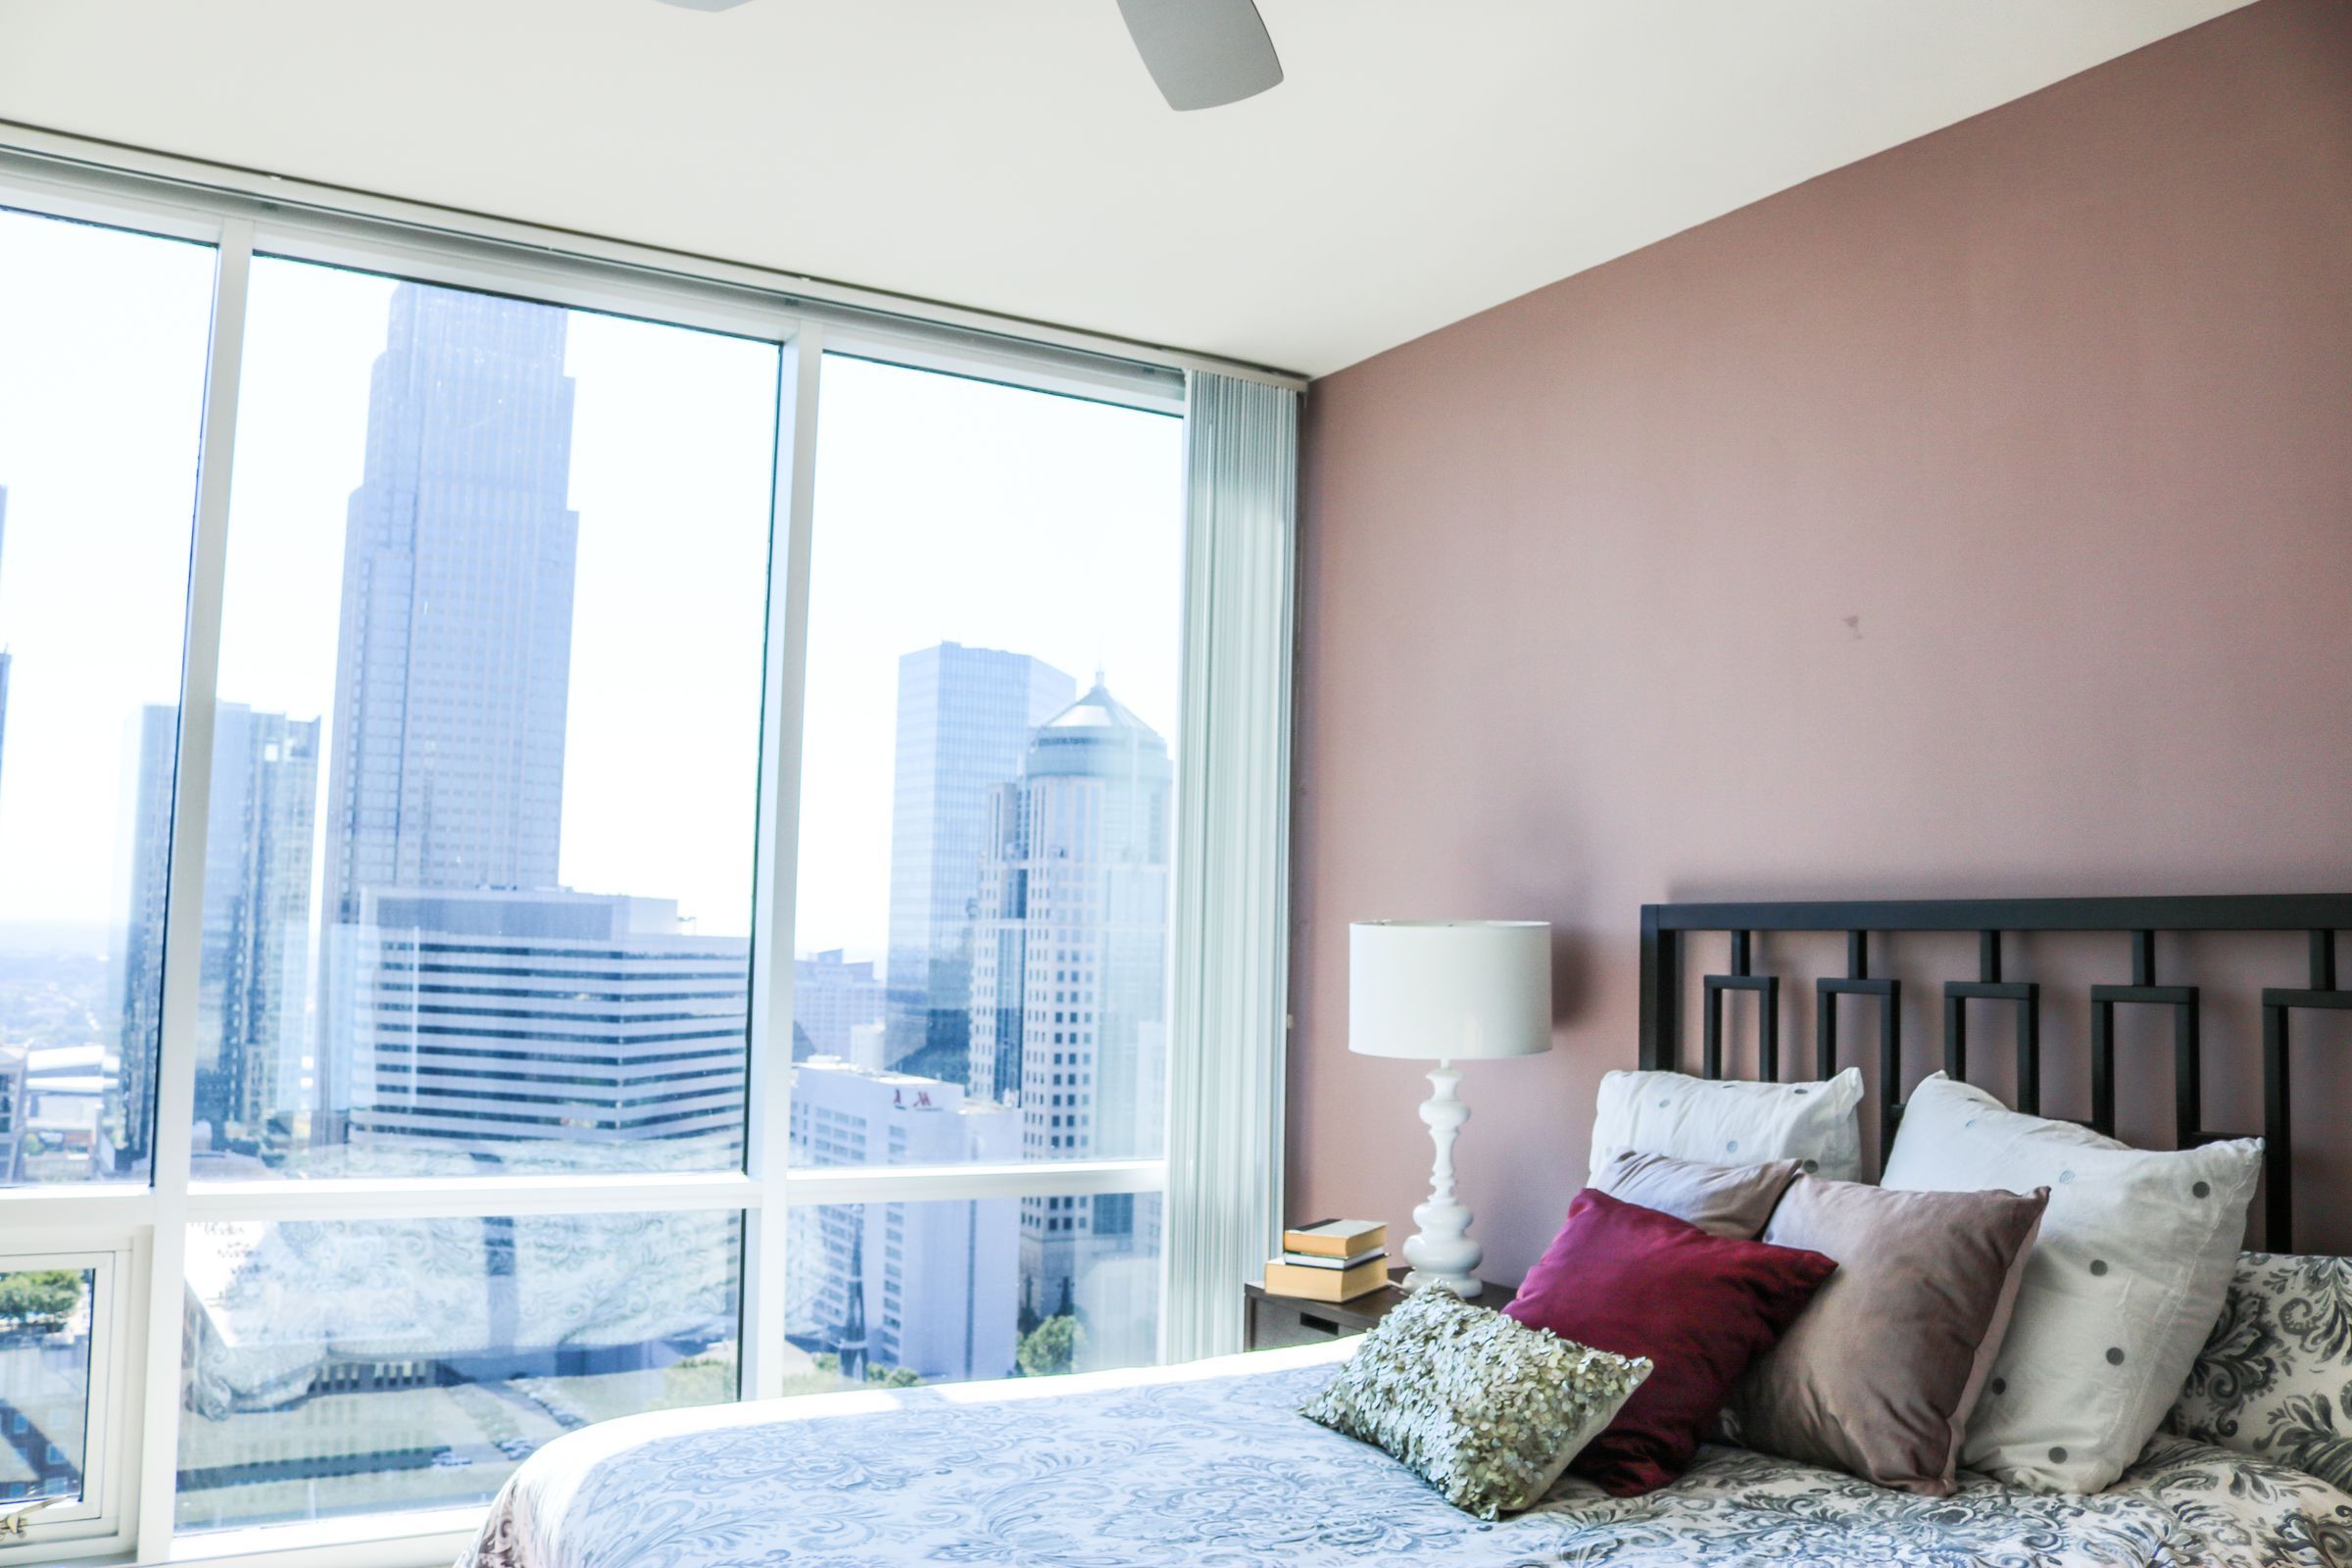 The Vue at Charlotte apartment interior bedroom with a large bed, a chair, and a view of Uptown Charlotte through floor to ceiling windows